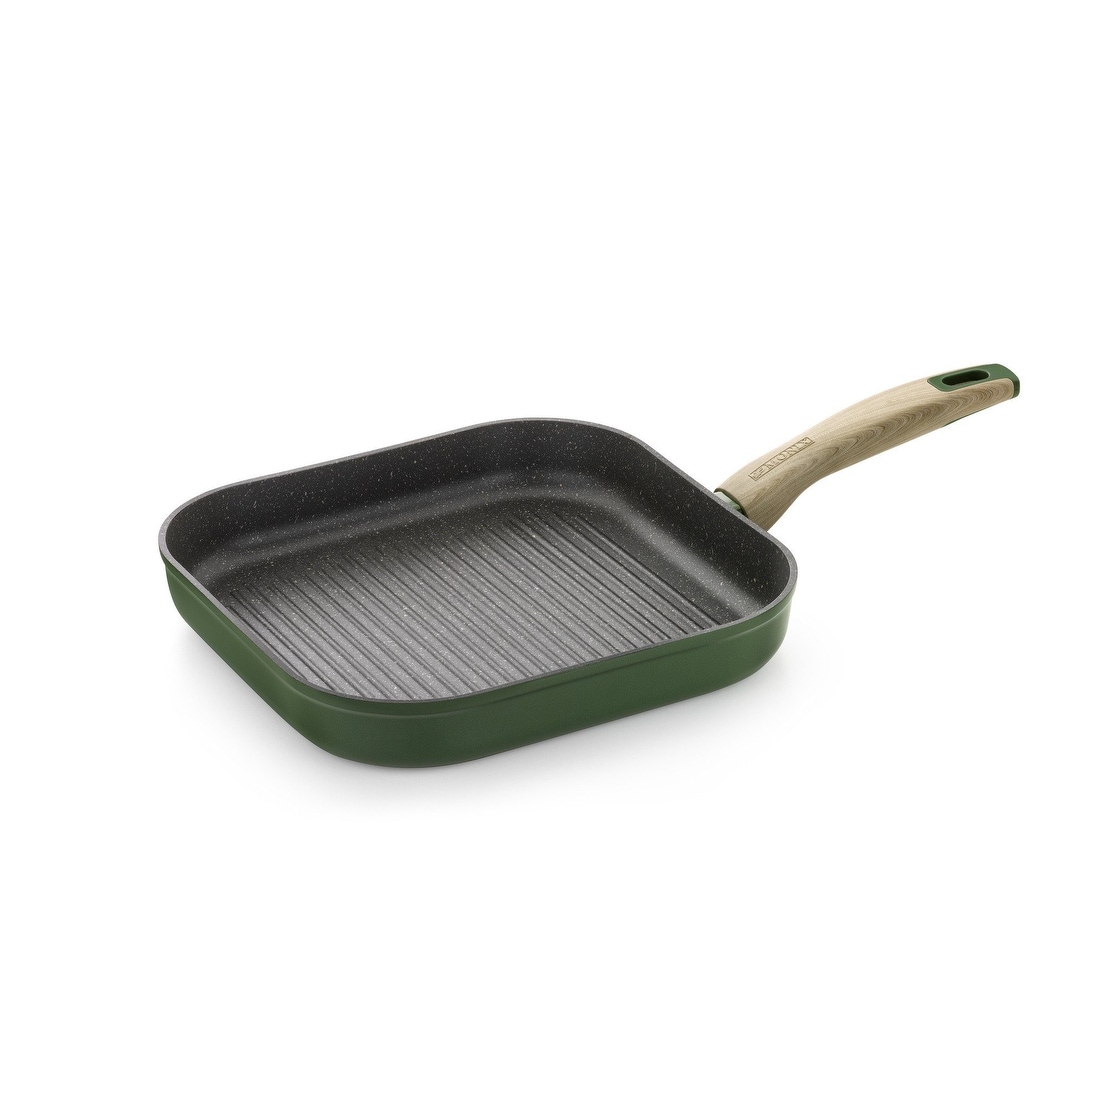 Cast Iron Round Grill Pan With Holes 10.25-In - Accessories